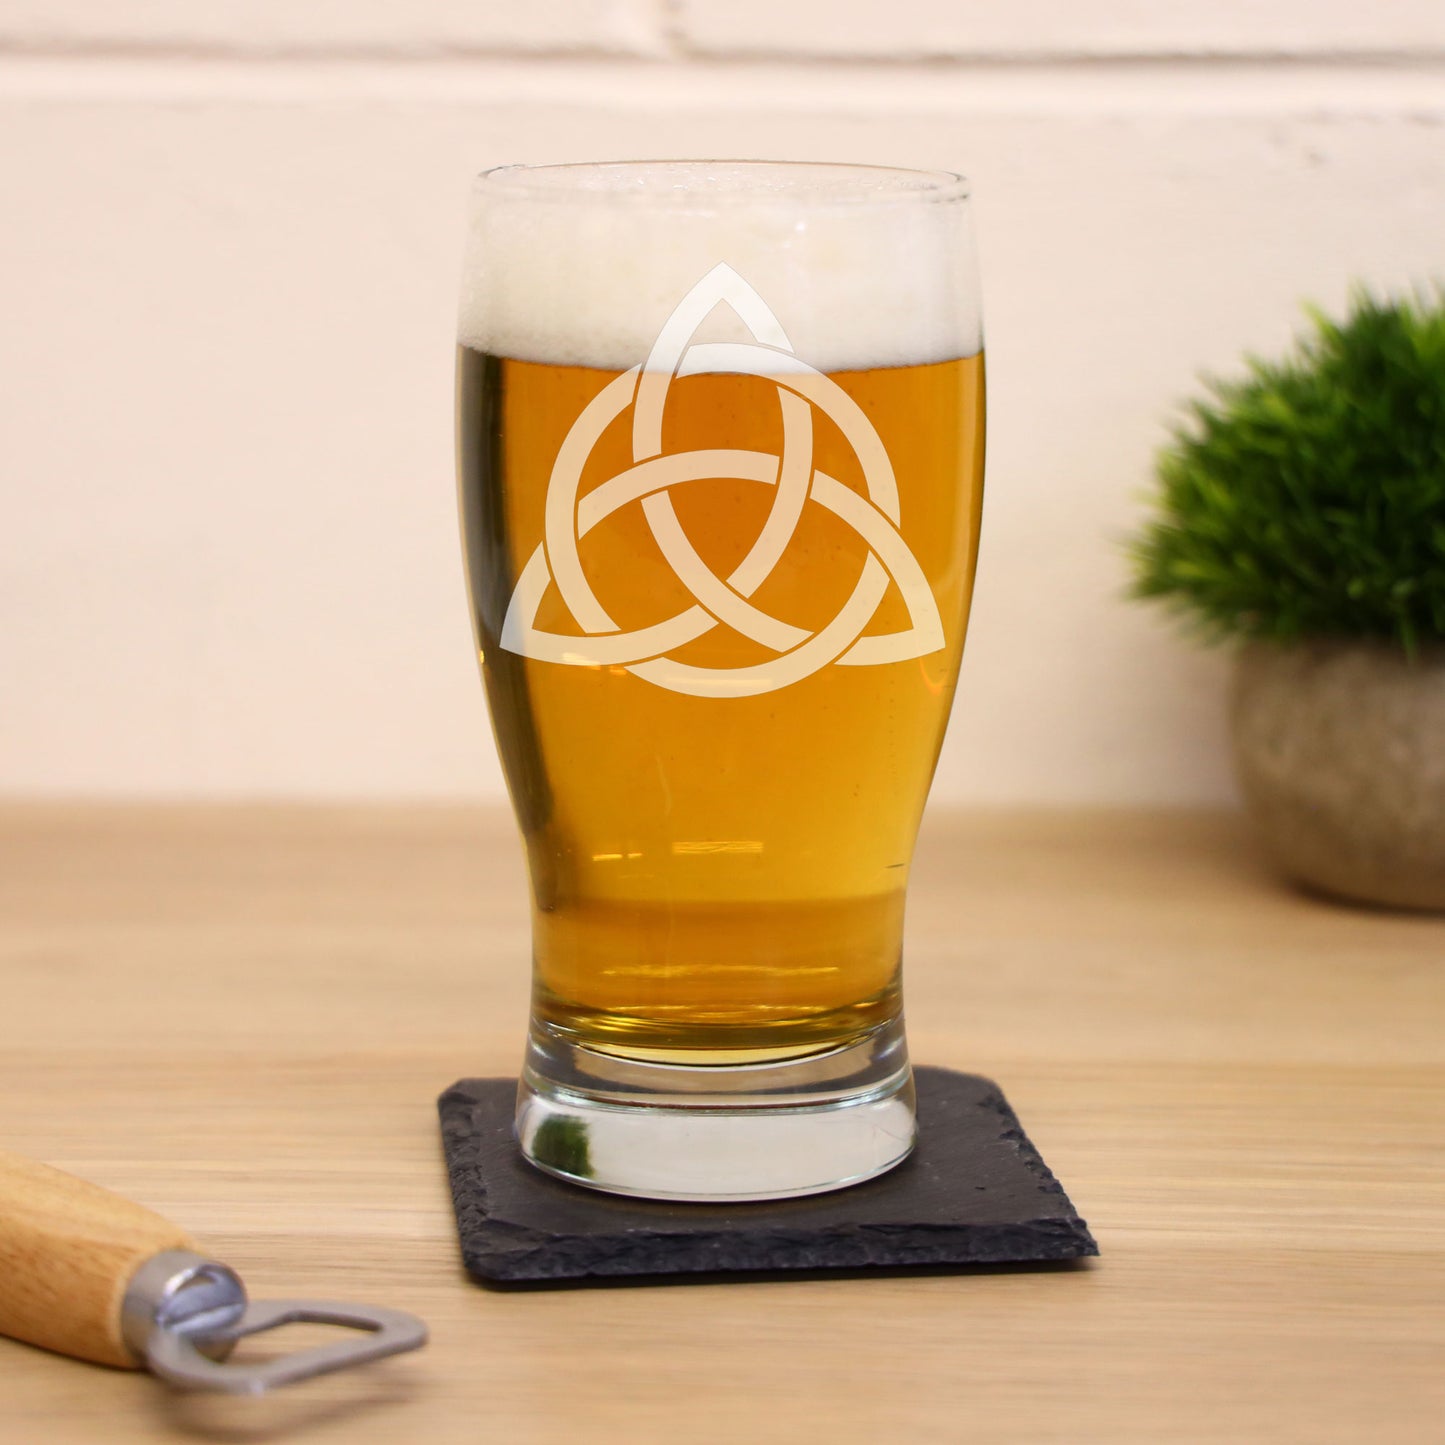 Celtic Knot Engraved Beer Pint Glass and/or Coaster Set  - Always Looking Good -   